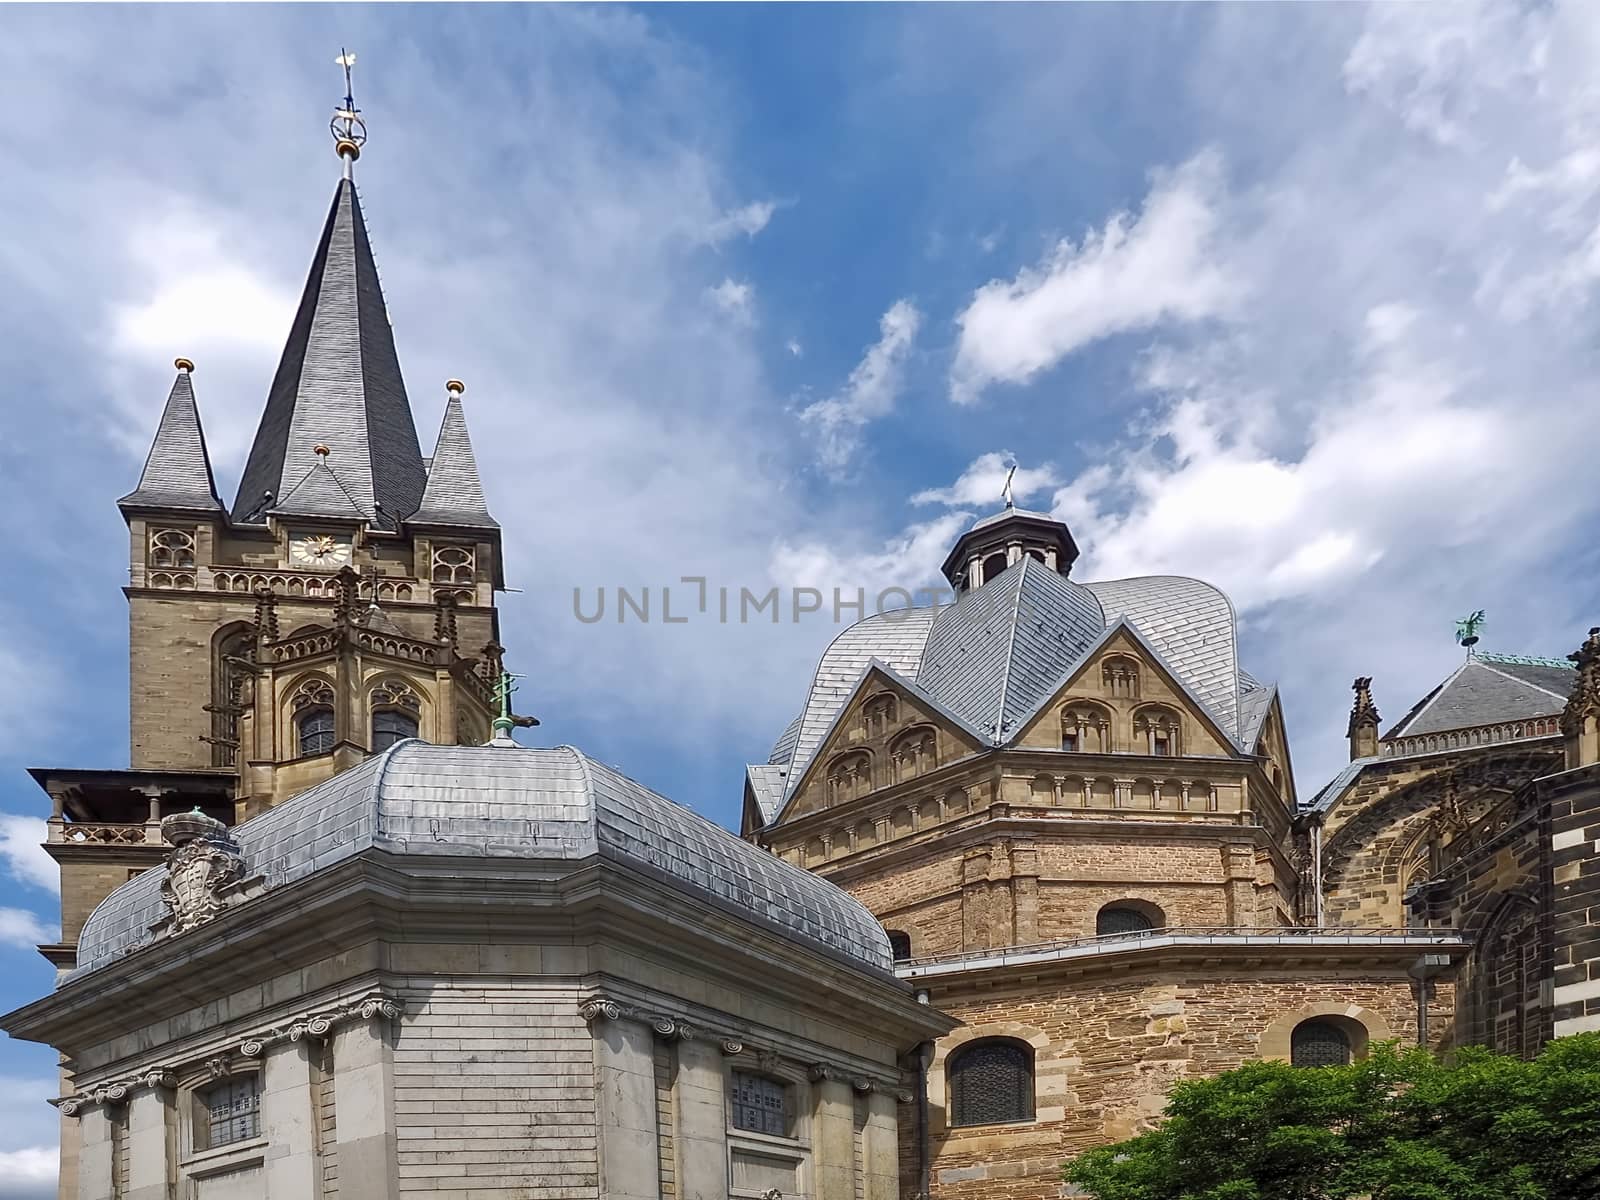 Impressive cathedral or church in Aachen in Germany by Stimmungsbilder